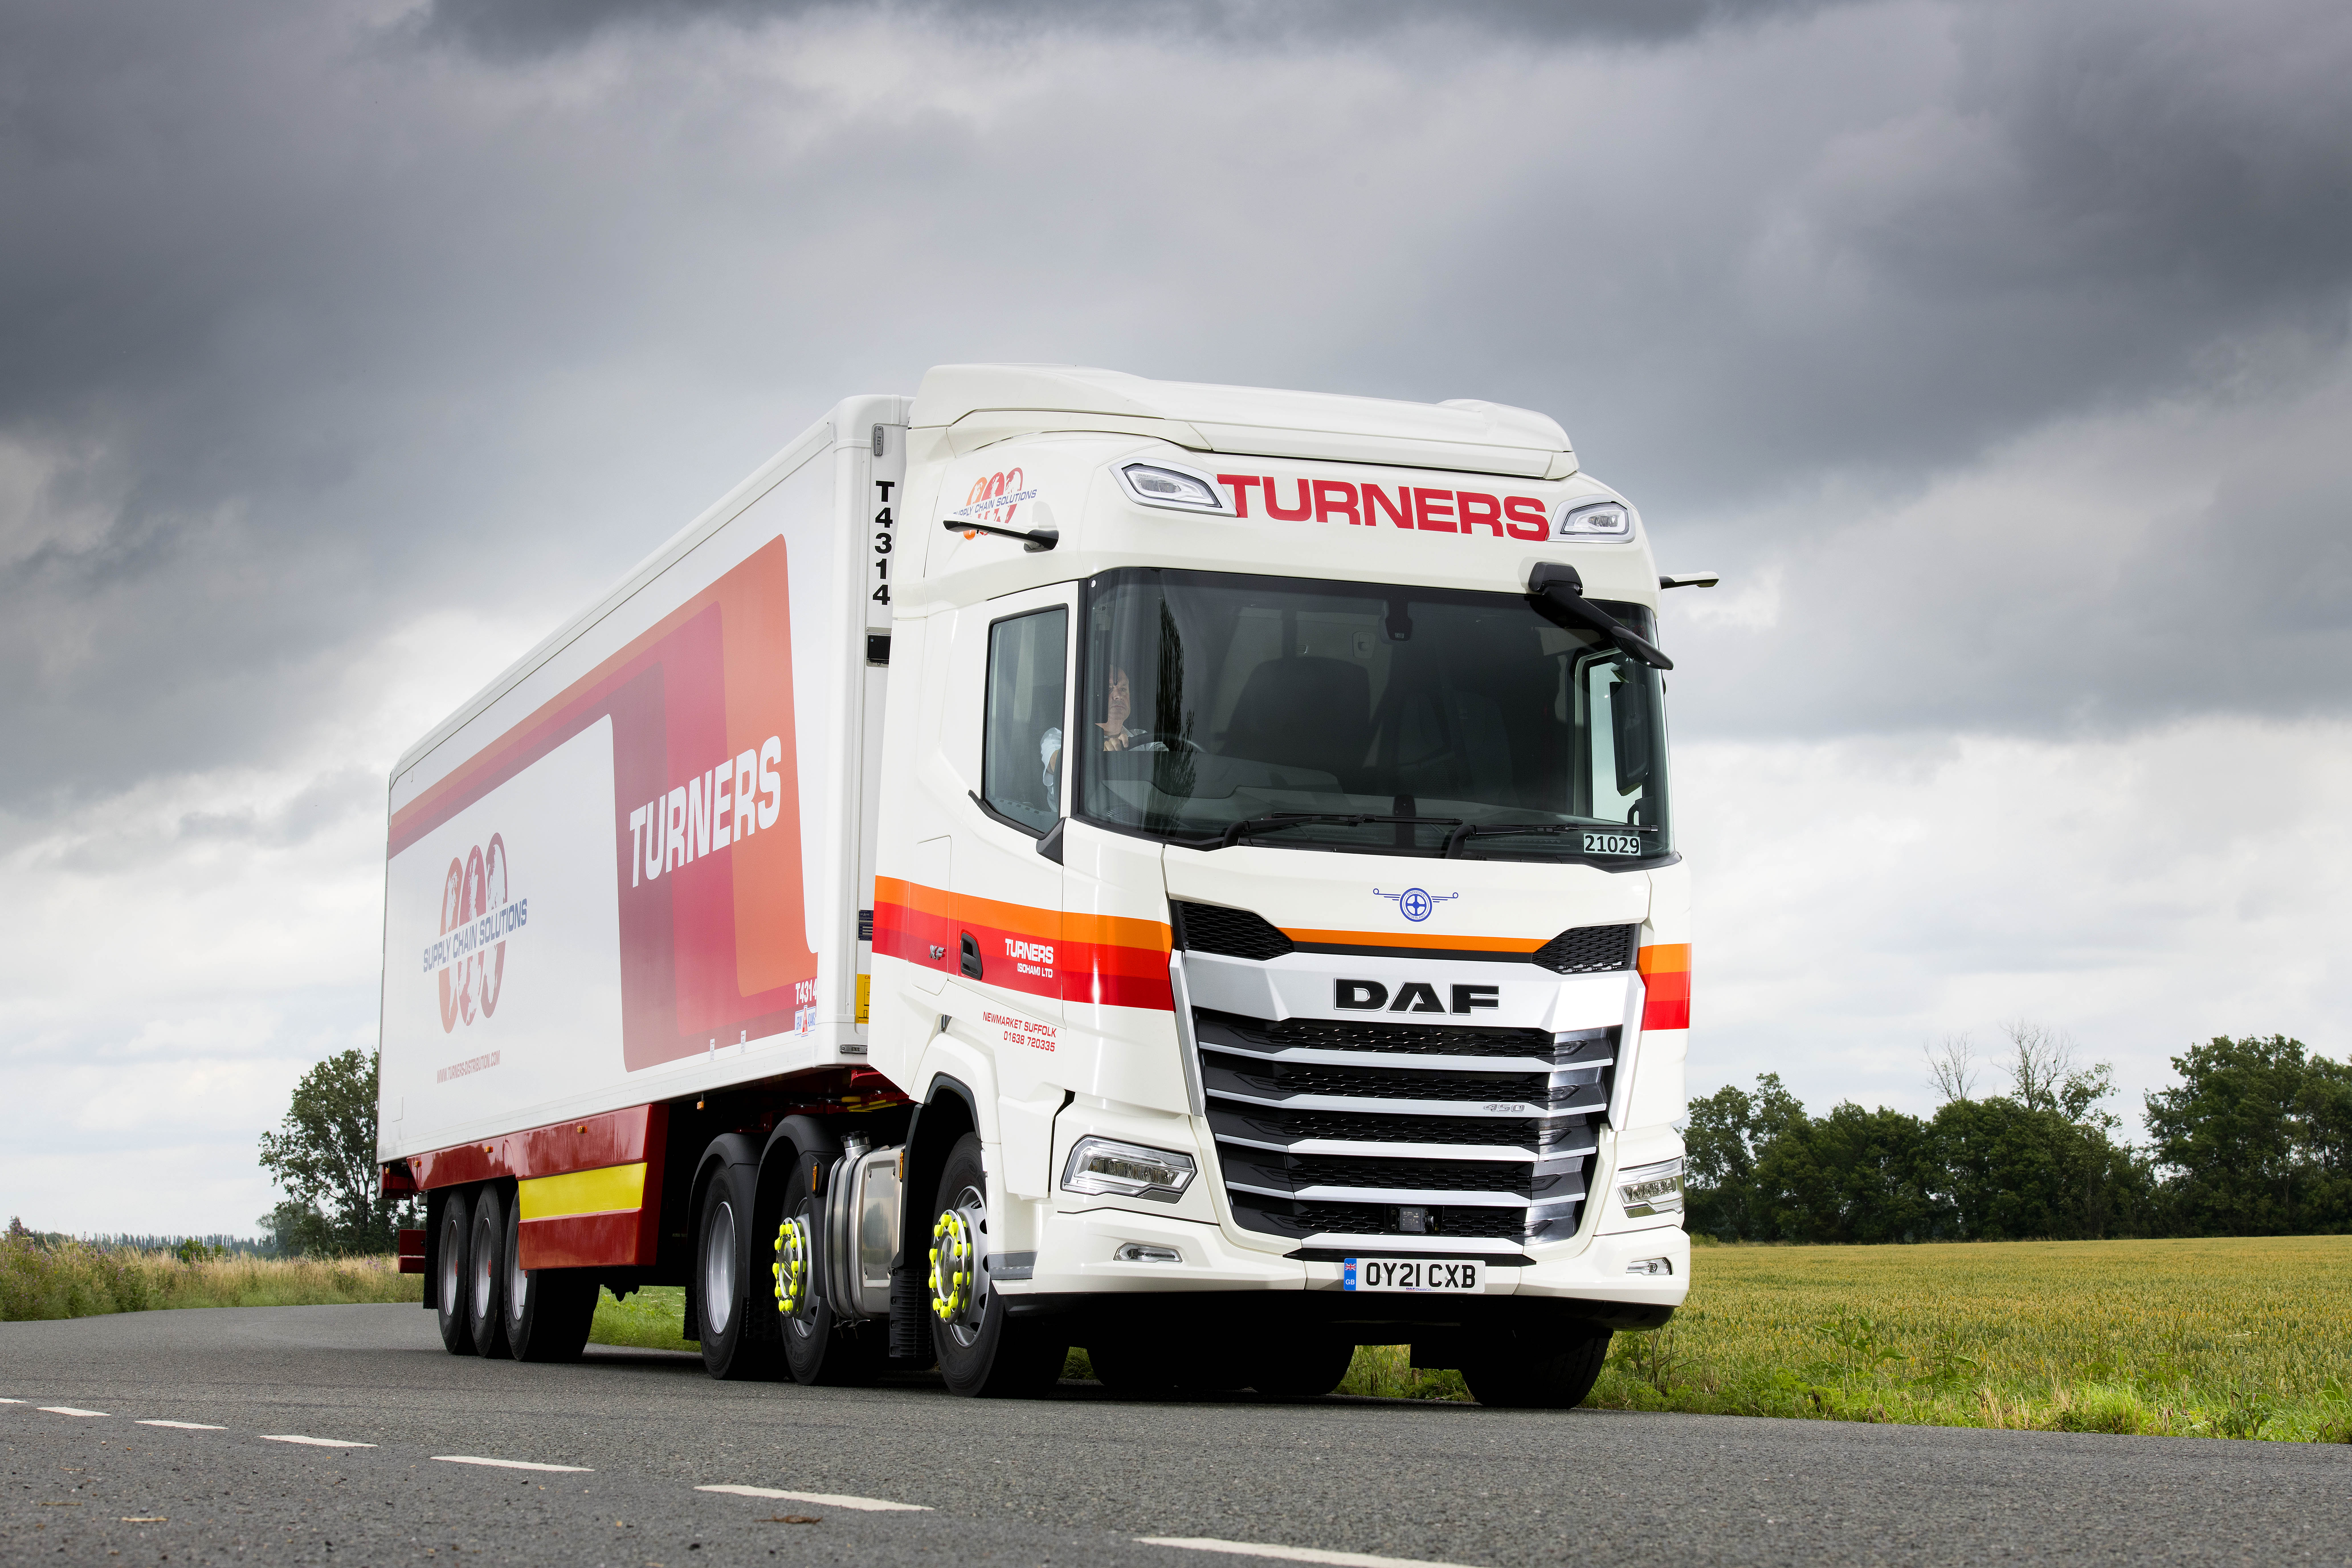 Turners DAF XF travelling through countryside